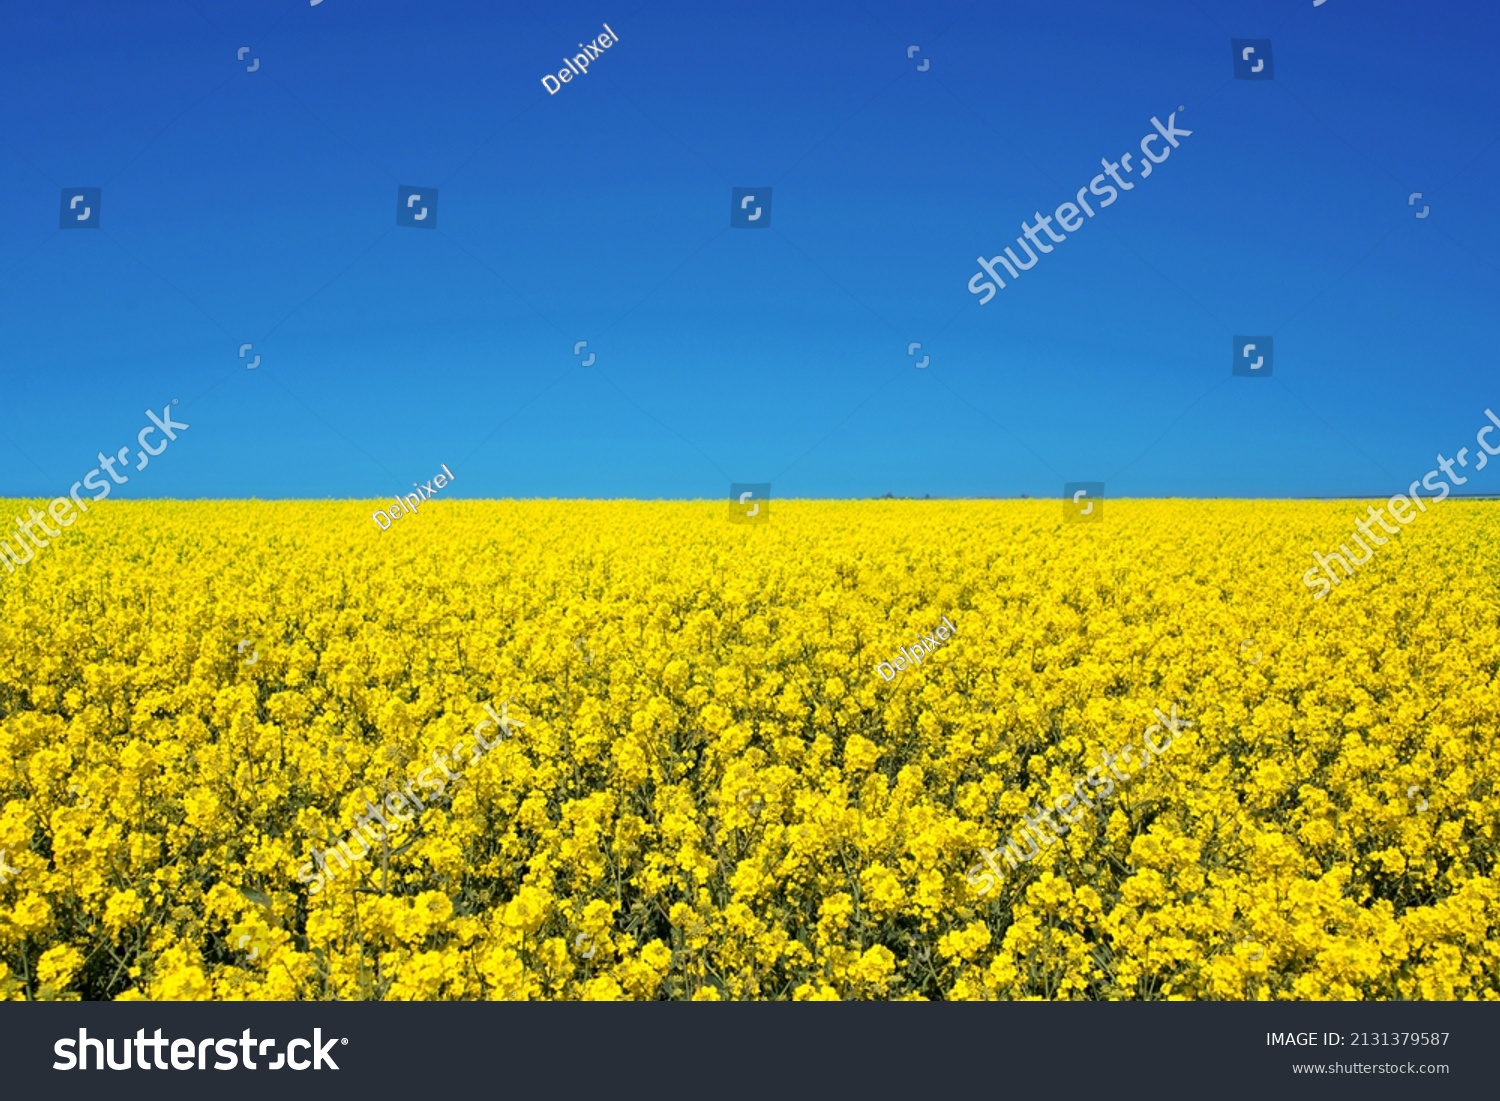 Field of colza rapeseed yellow flowers and blue sky, Ukrainian flag colors, Ukraine agriculture illustration #2131379587